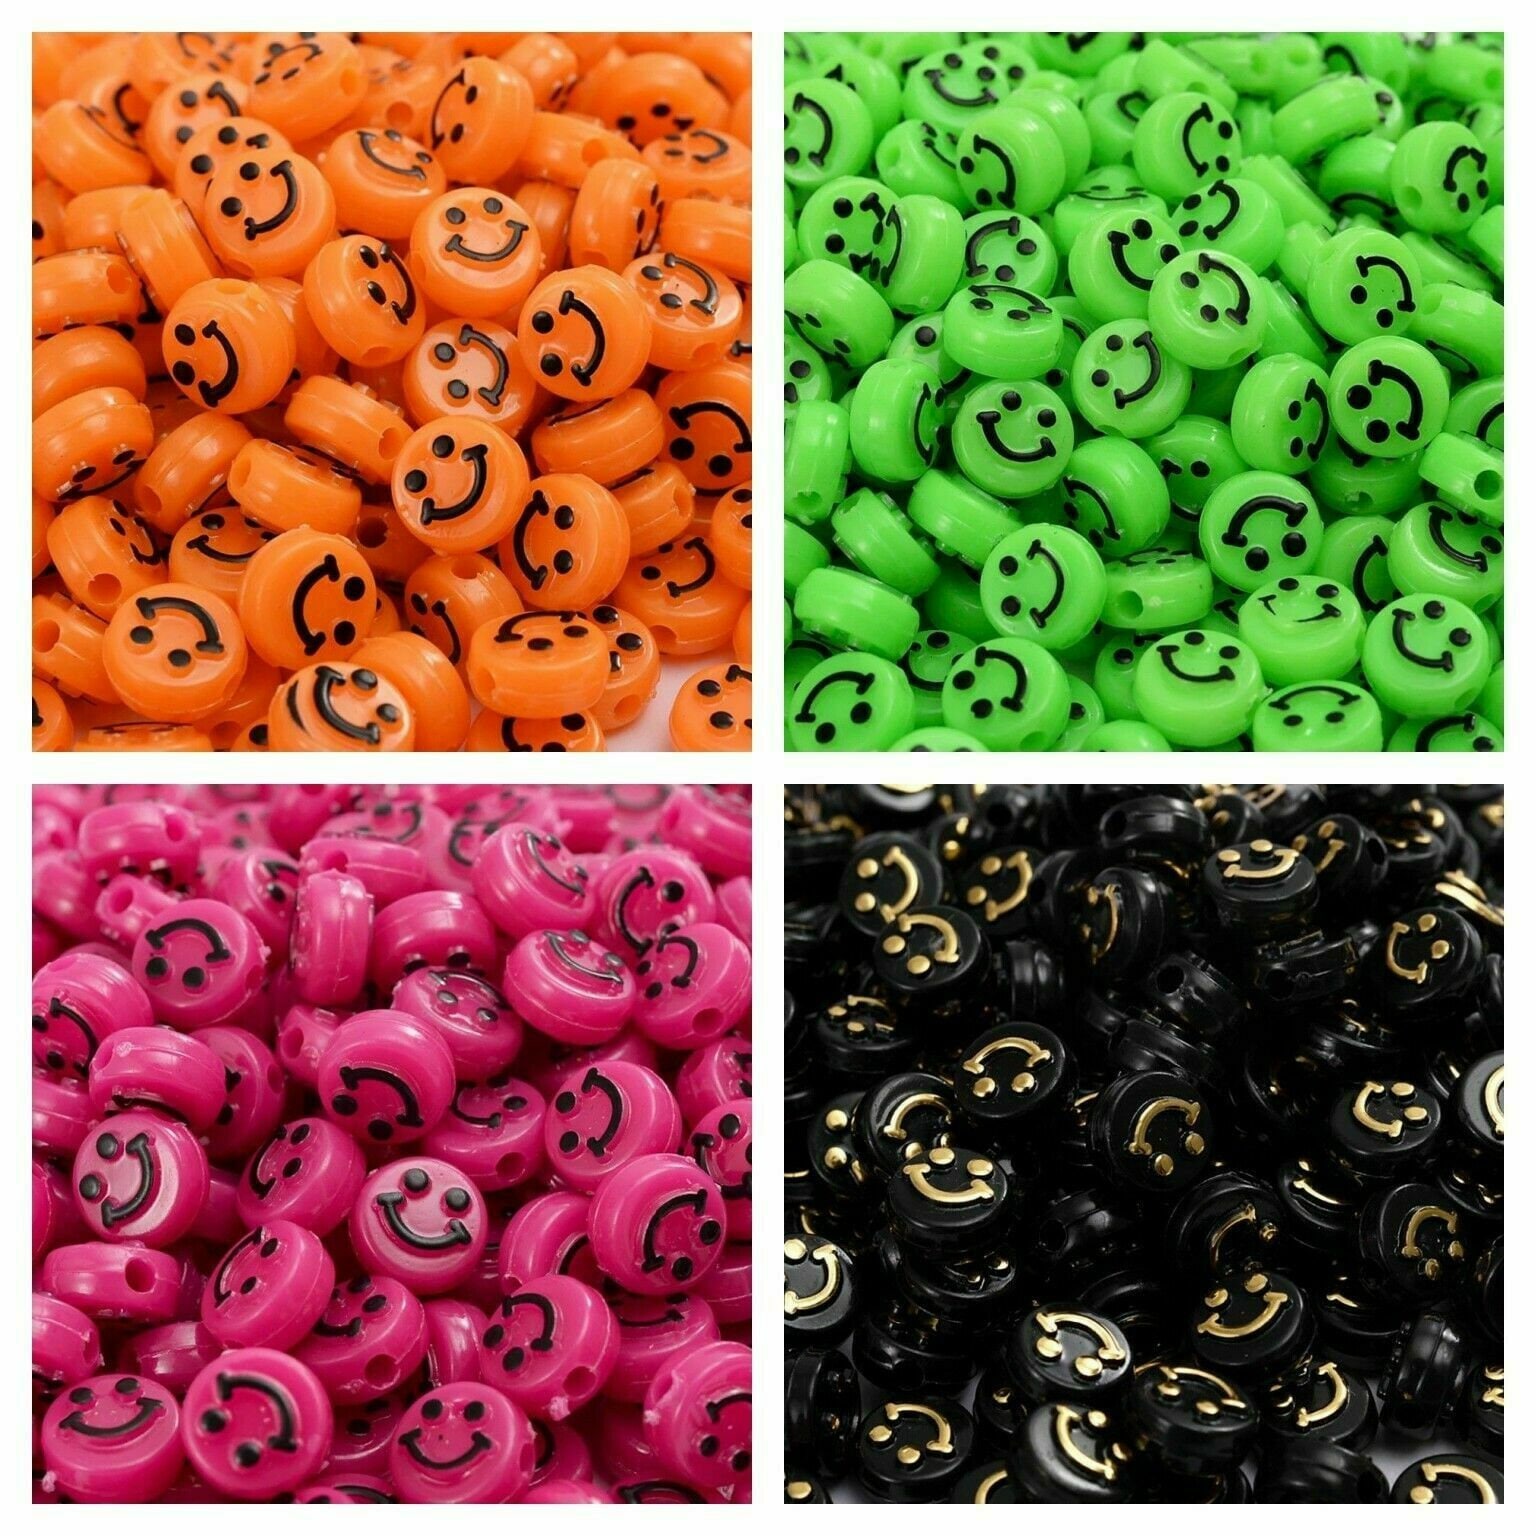 Luminous Acrylic Glow in the Dark 10x5mm Smiley Face Beads